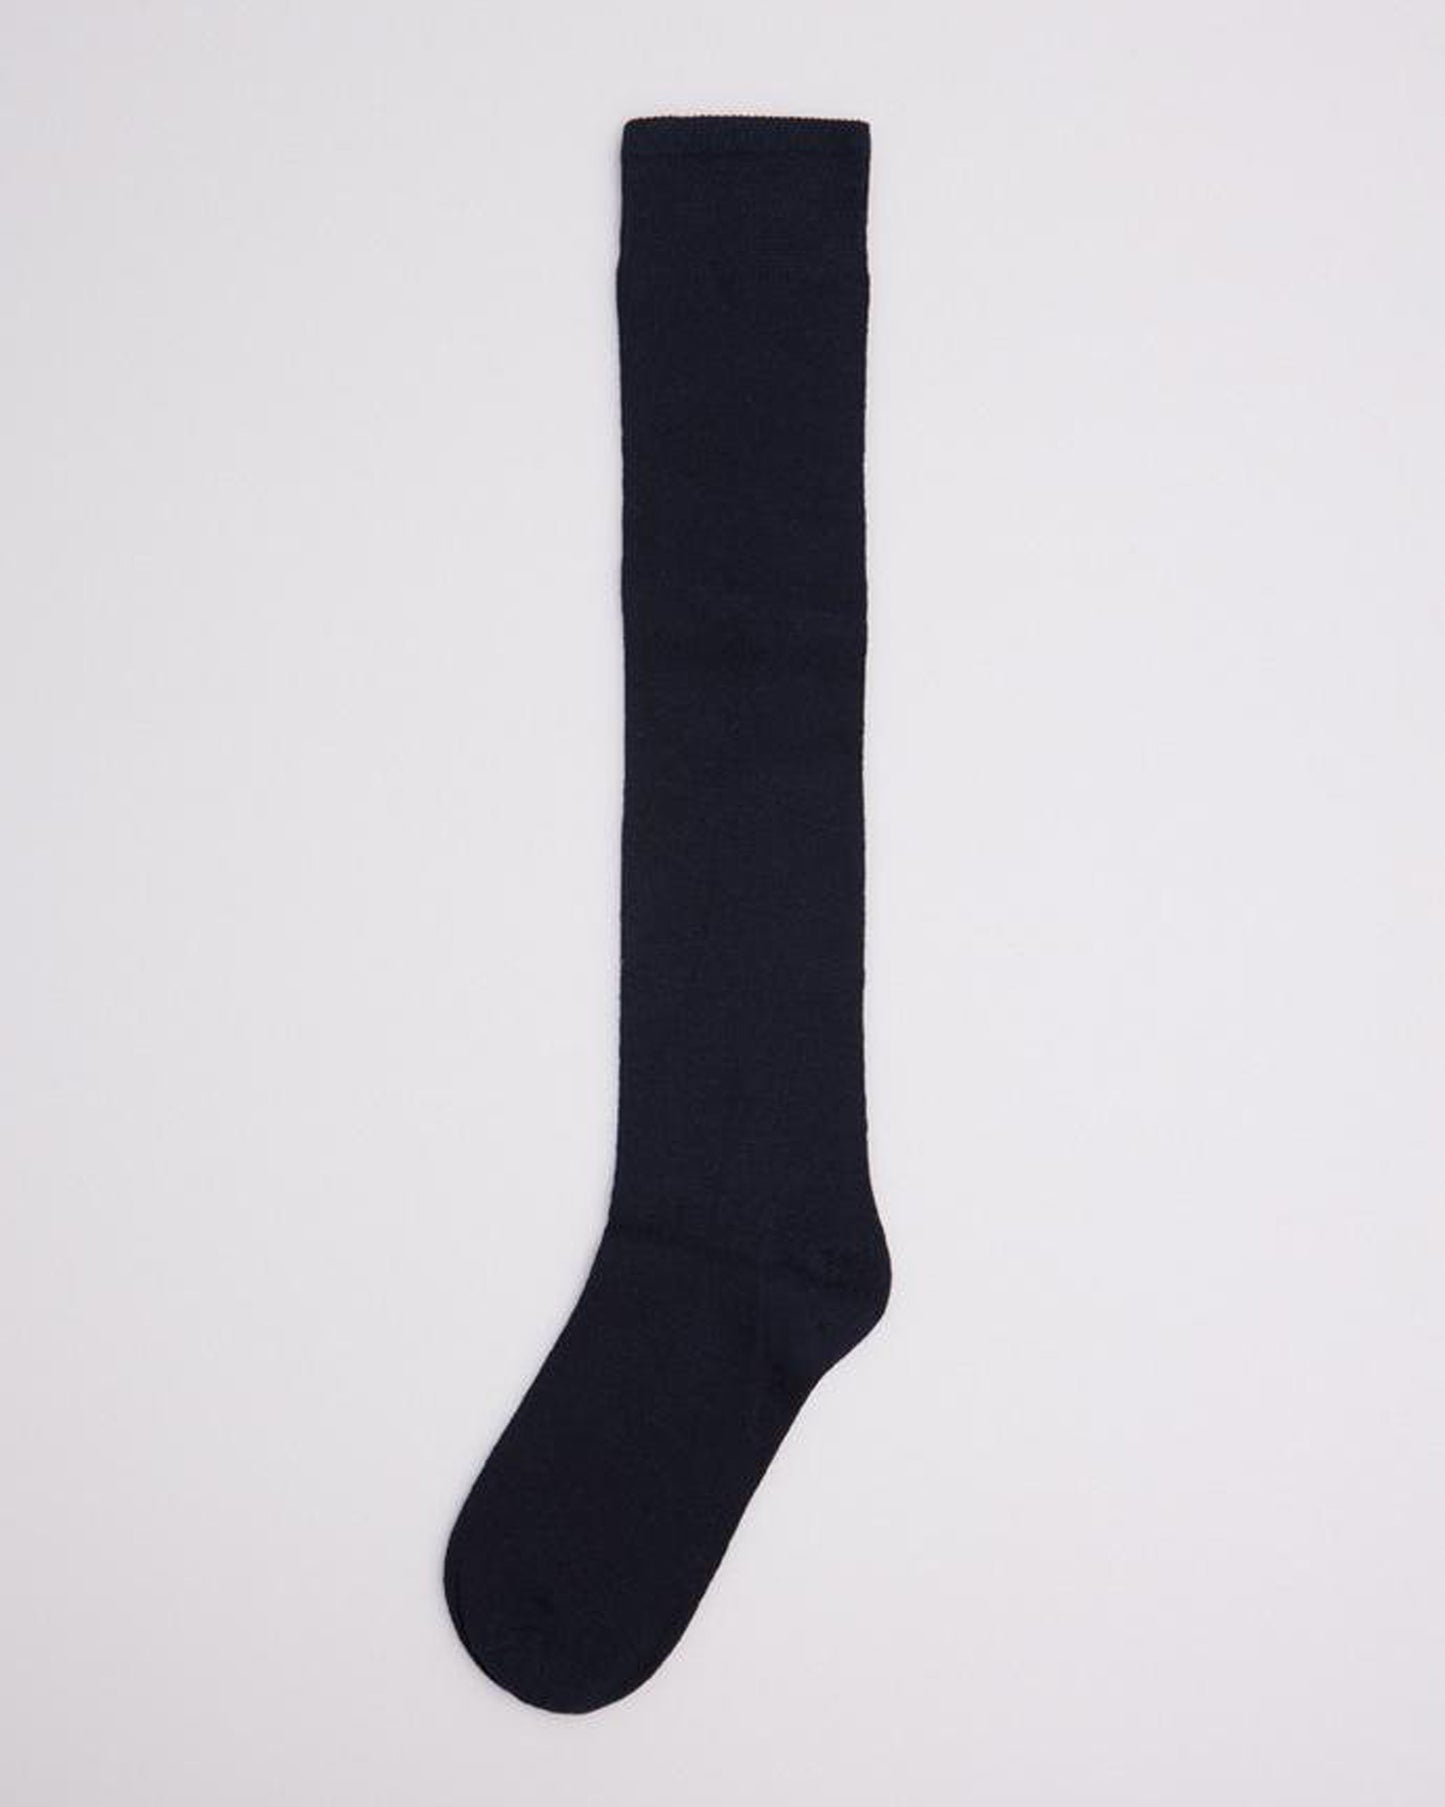 Ysabel Mora 12374 Cotton Knee-Highs - navy cotton knee-high socks with an elasticated comfort cuff, flat toe seams and shaped heel.